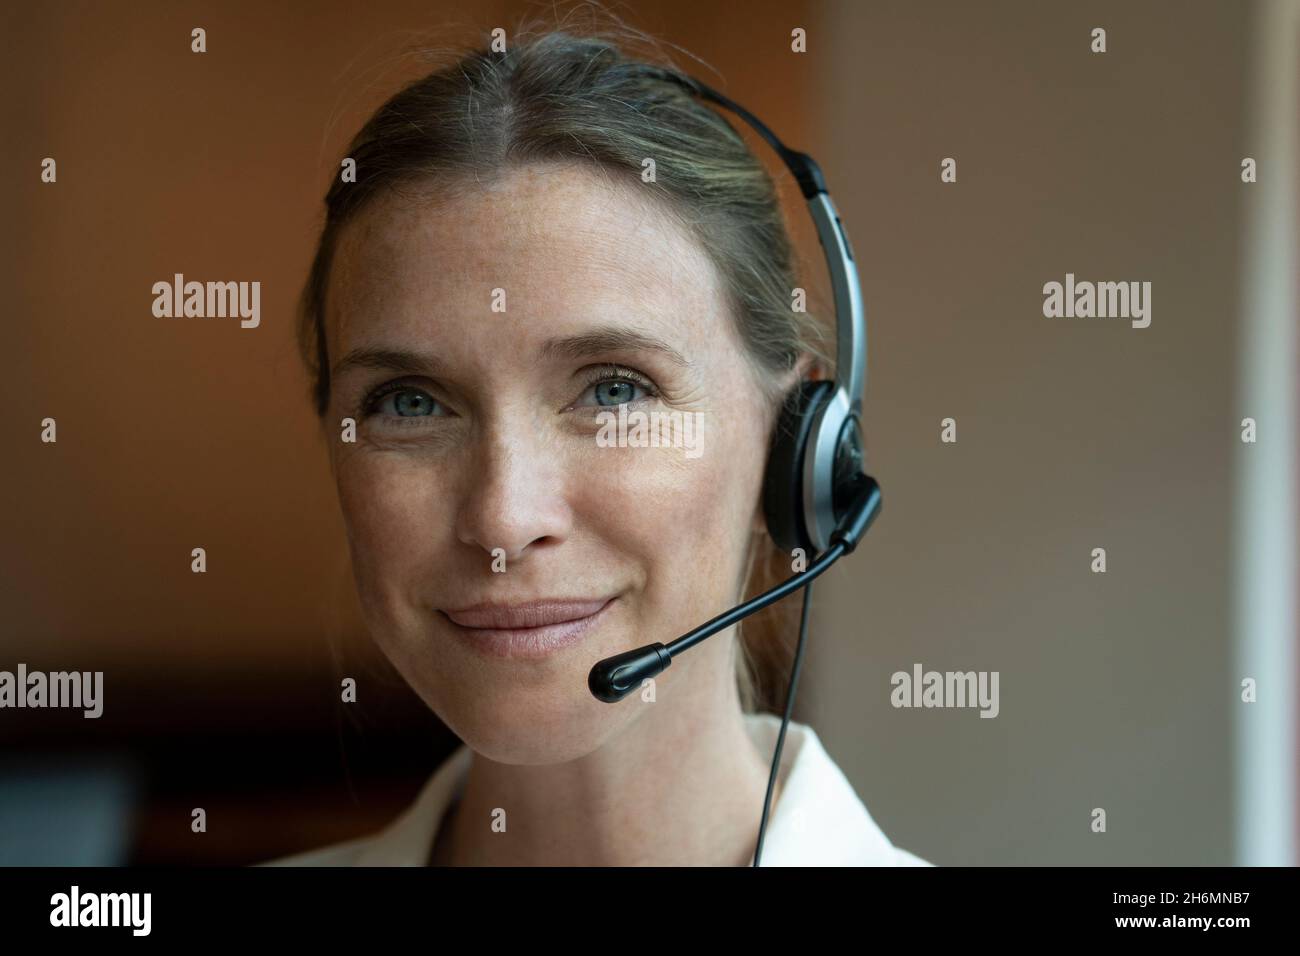 Portrait of mature woman wearing headset in office Stock Photo